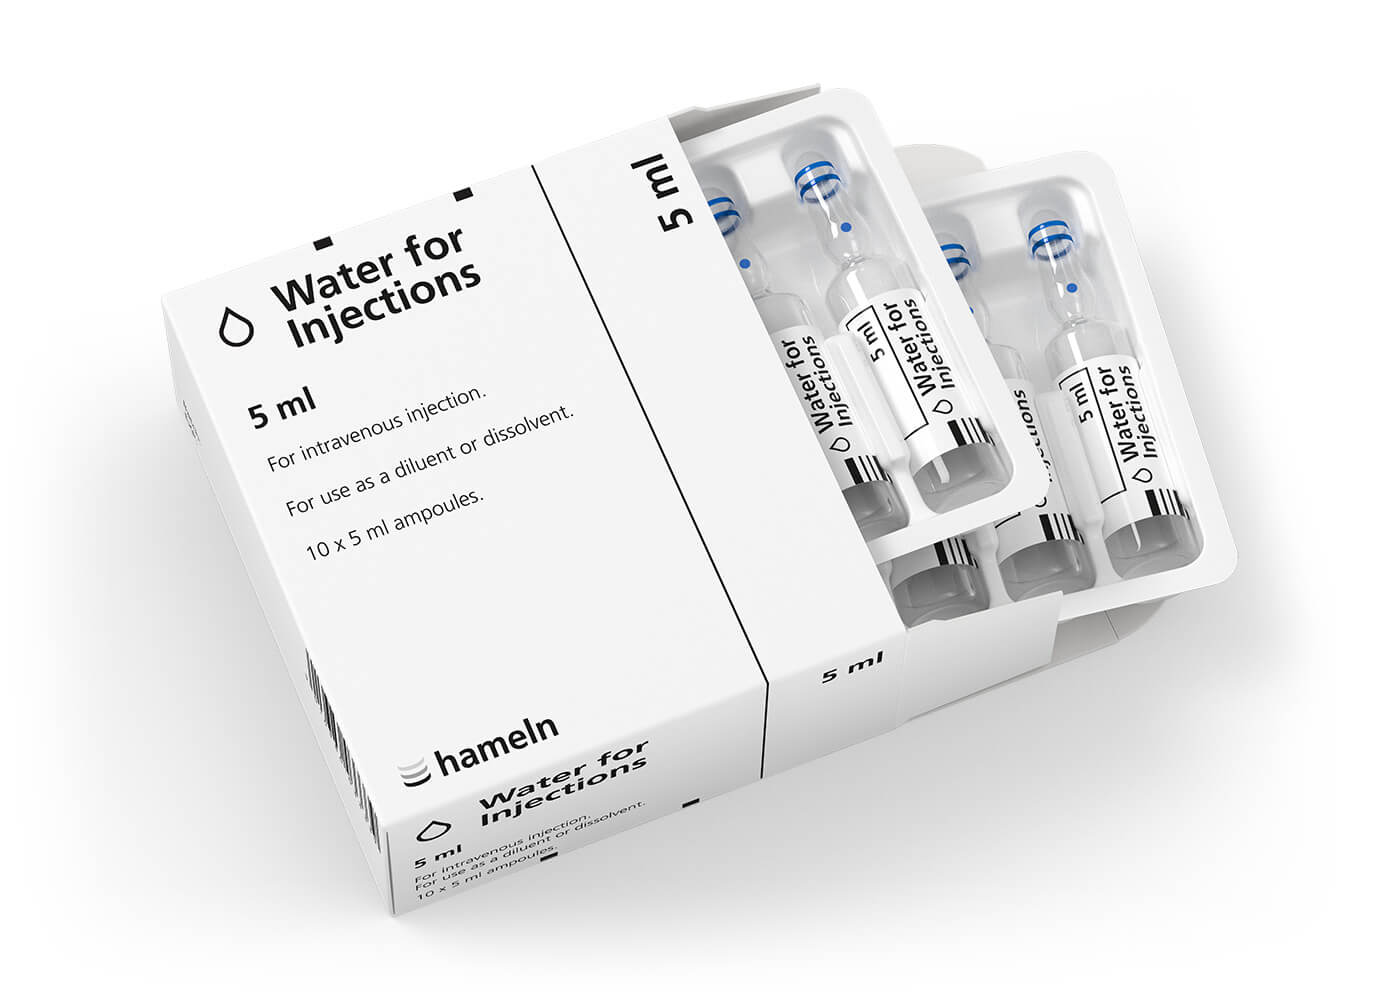 Picture of Water for injections 5ml x 10 (5ml x 10amps) - EXPIRES 10/24